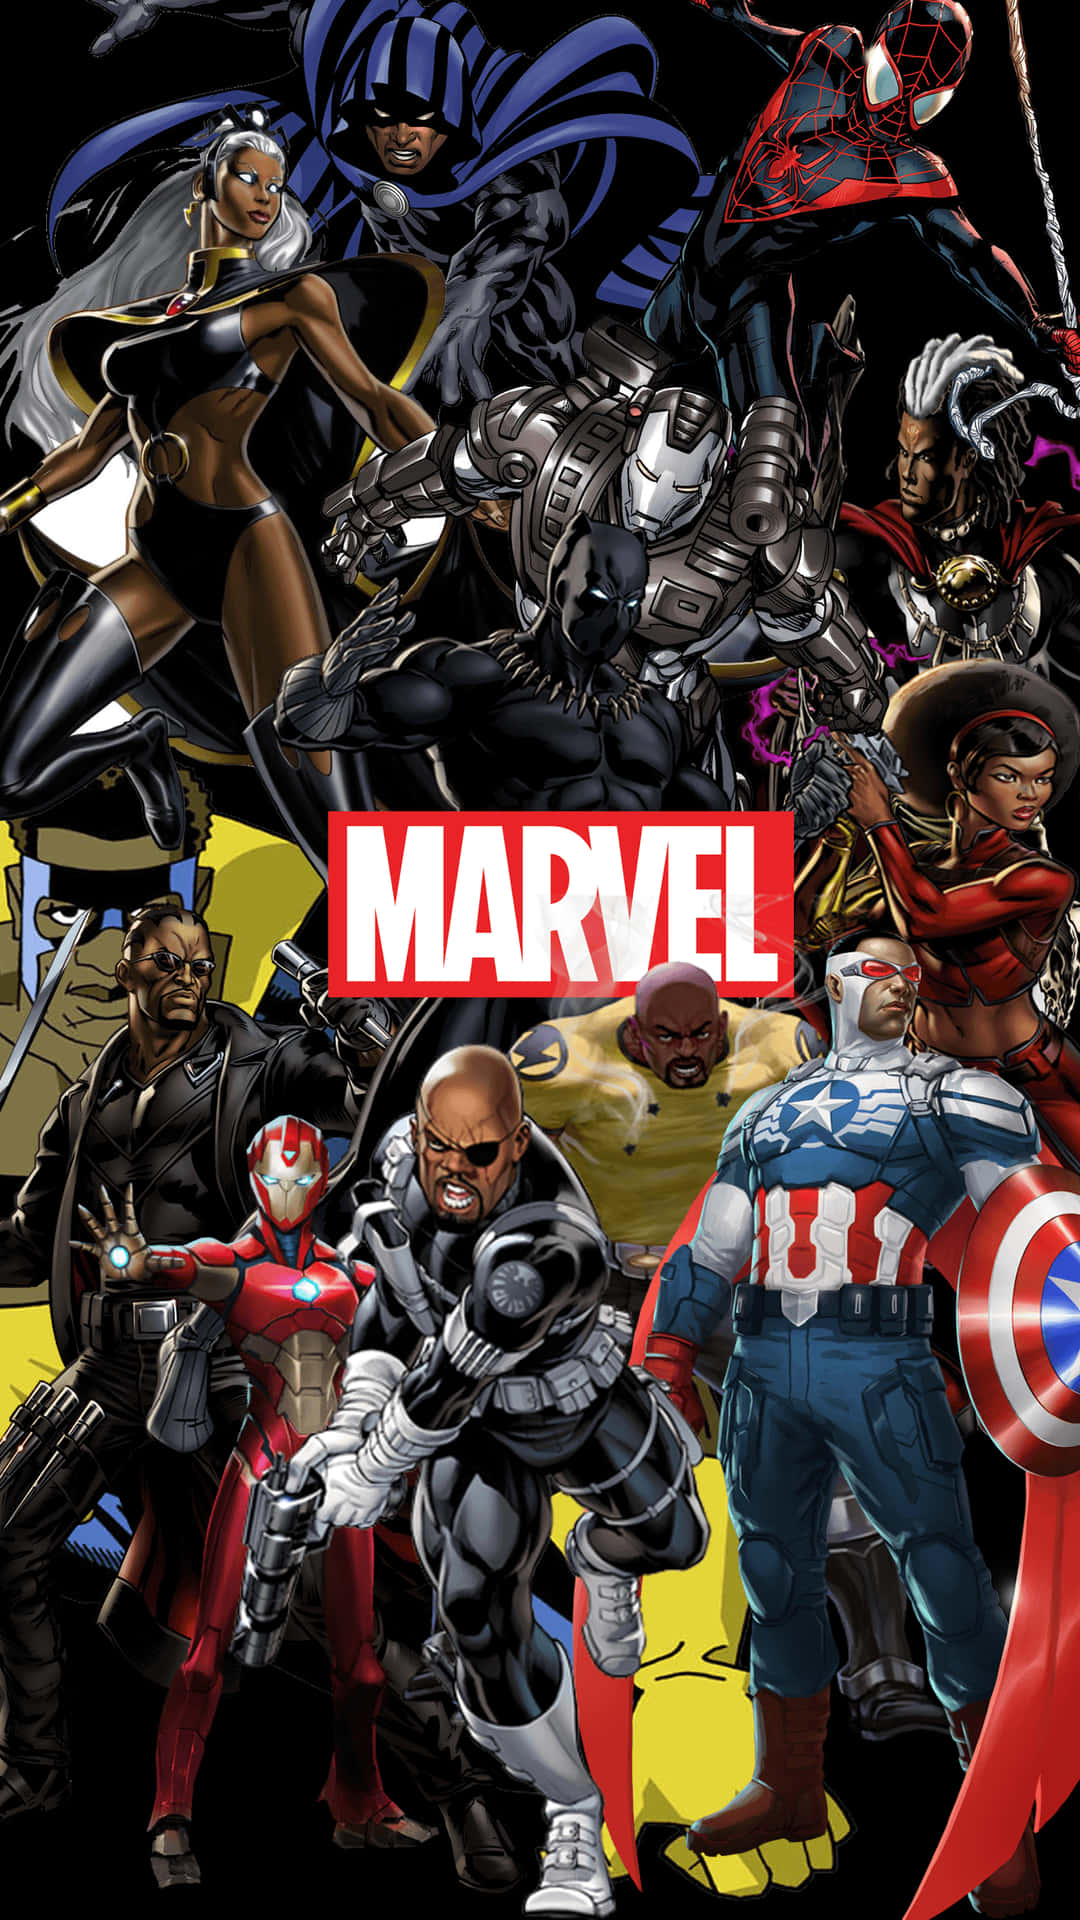 Unleash the power of Marvel&DC on your iPhone! Wallpaper